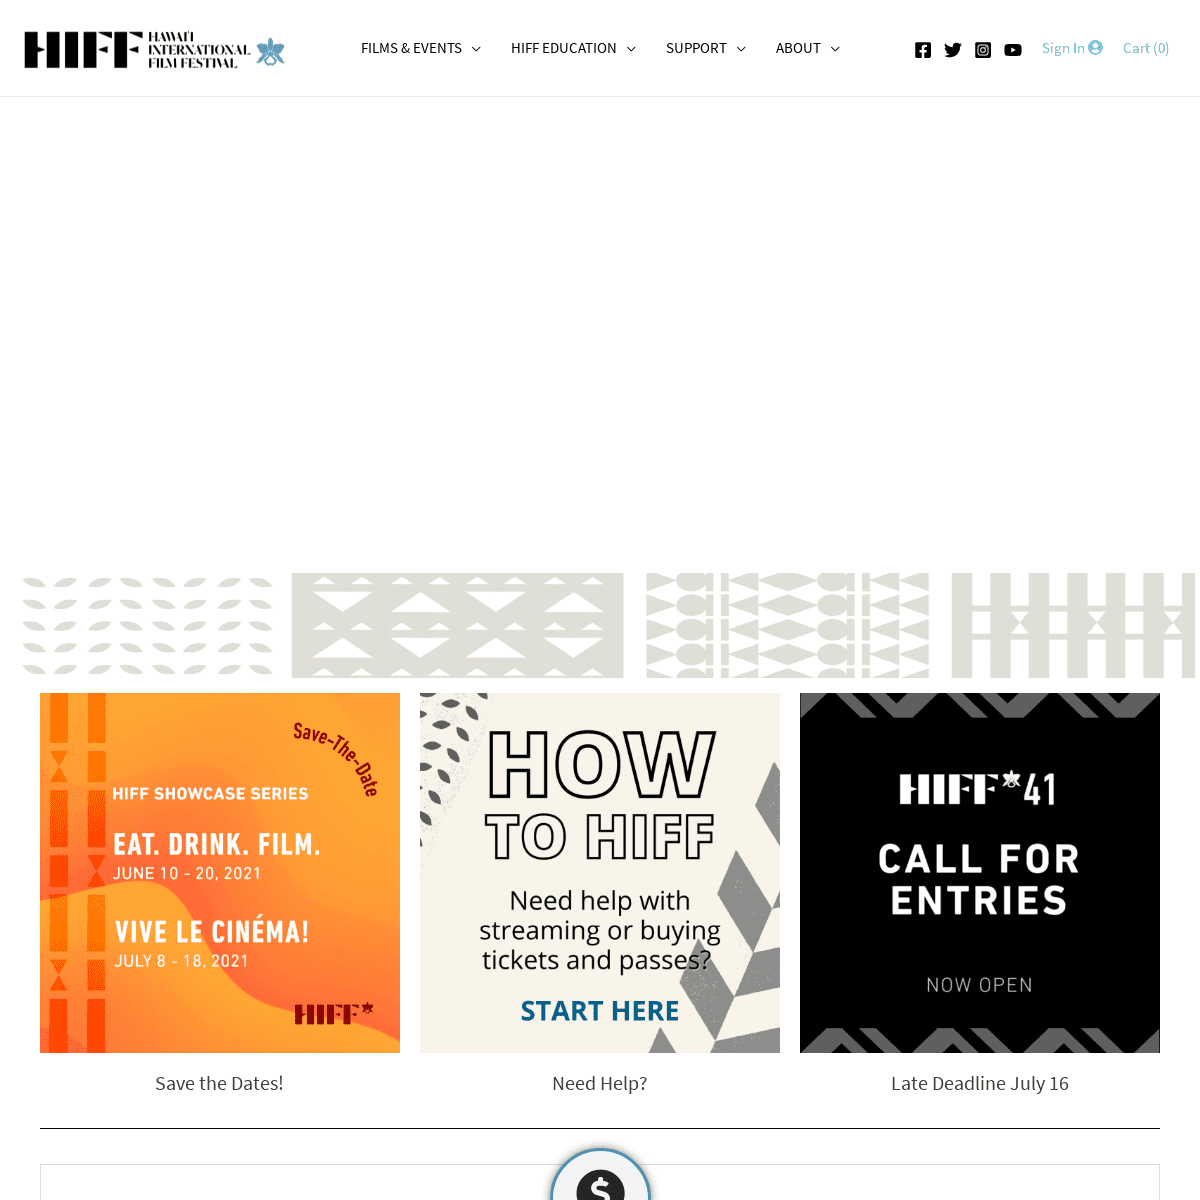 A complete backup of https://hiff.org